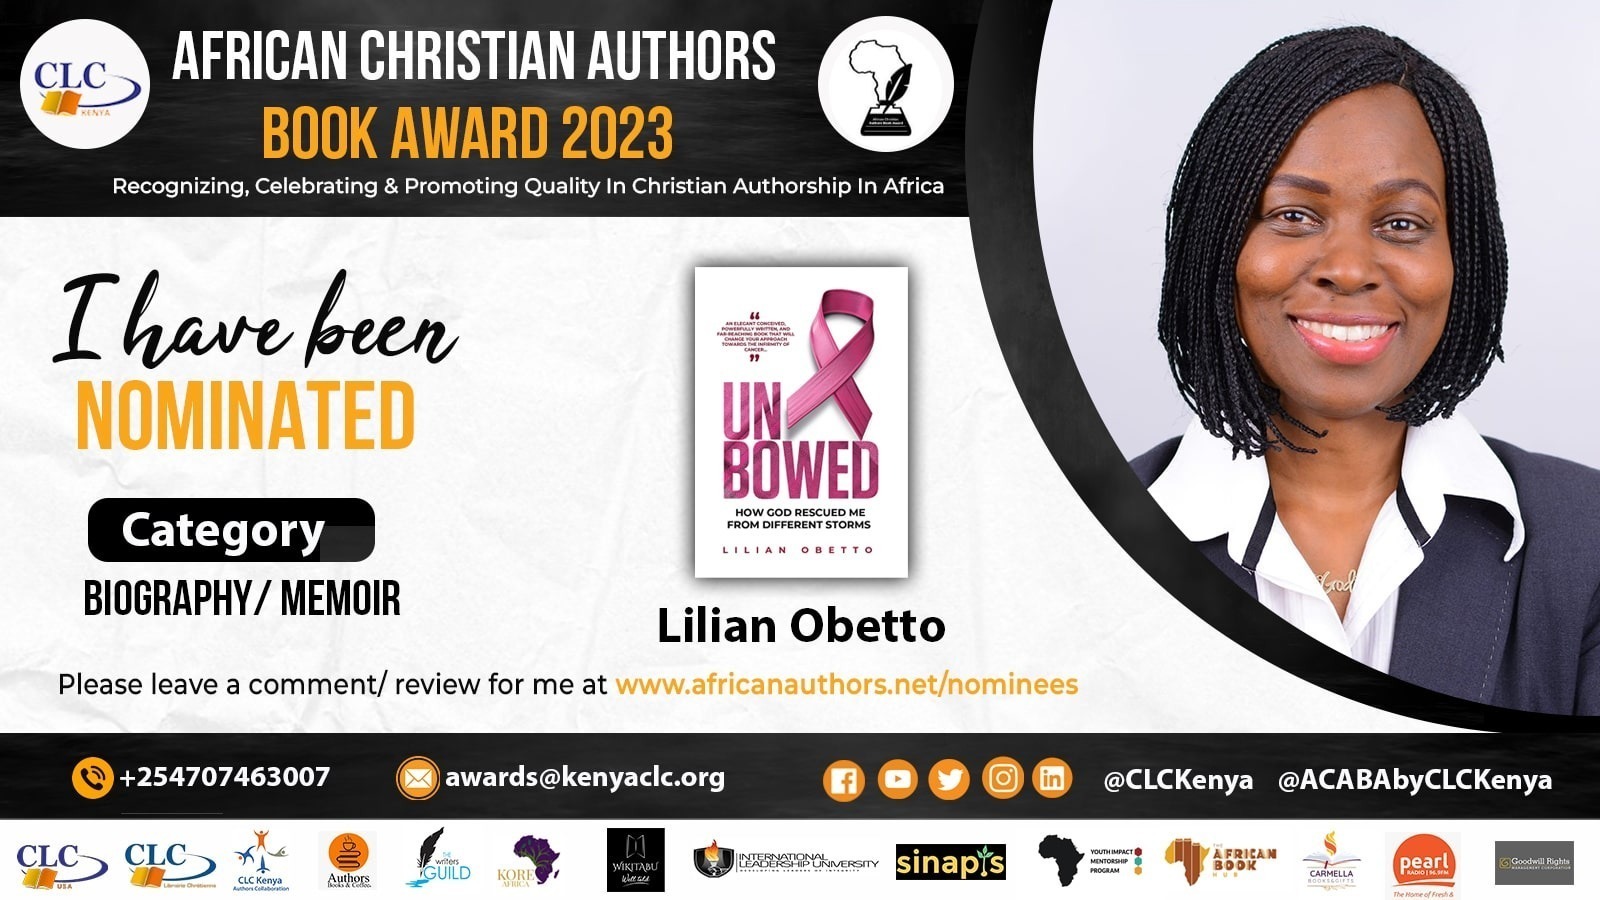 Lilian’s Book Title Unbowed Was Both About Her Personal Journey And Authorship